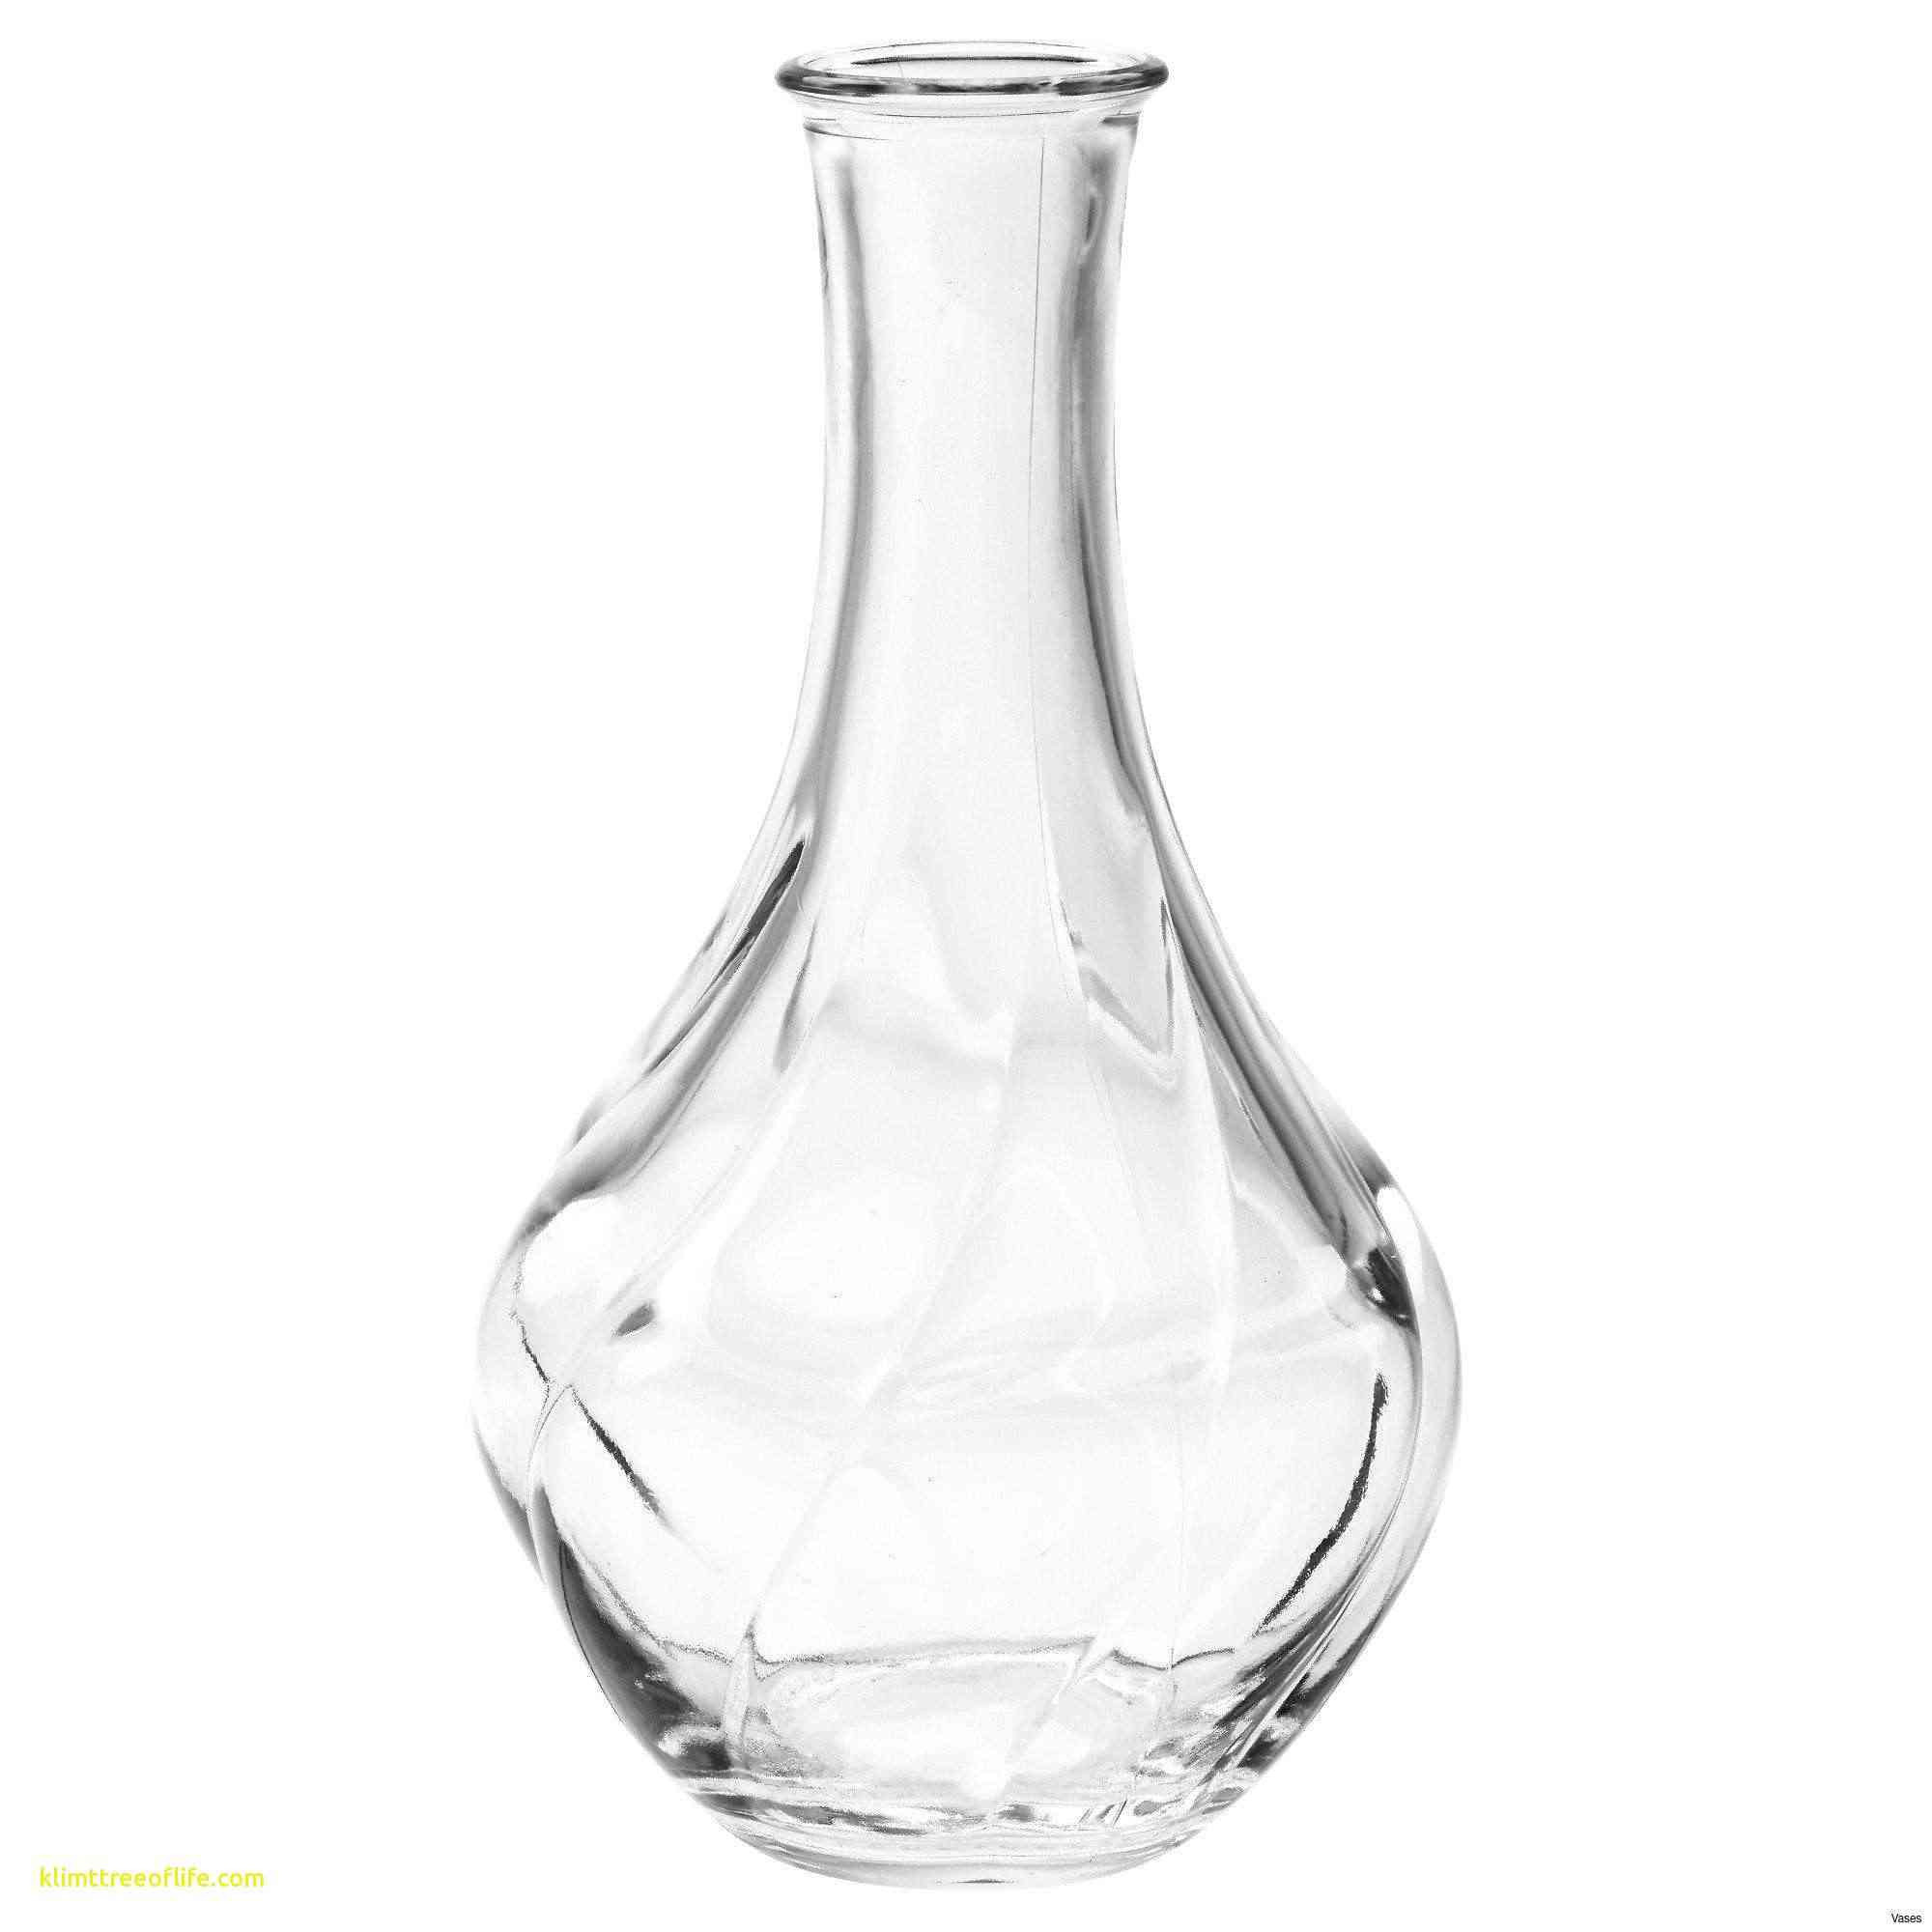 19 Lovely Antique Chinese Glass Vase 2024 free download antique chinese glass vase of wide glass vase images paint a picture luxury h vases paint vase i with wide glass vase images paint a picture luxury h vases paint vase i 0d with glue